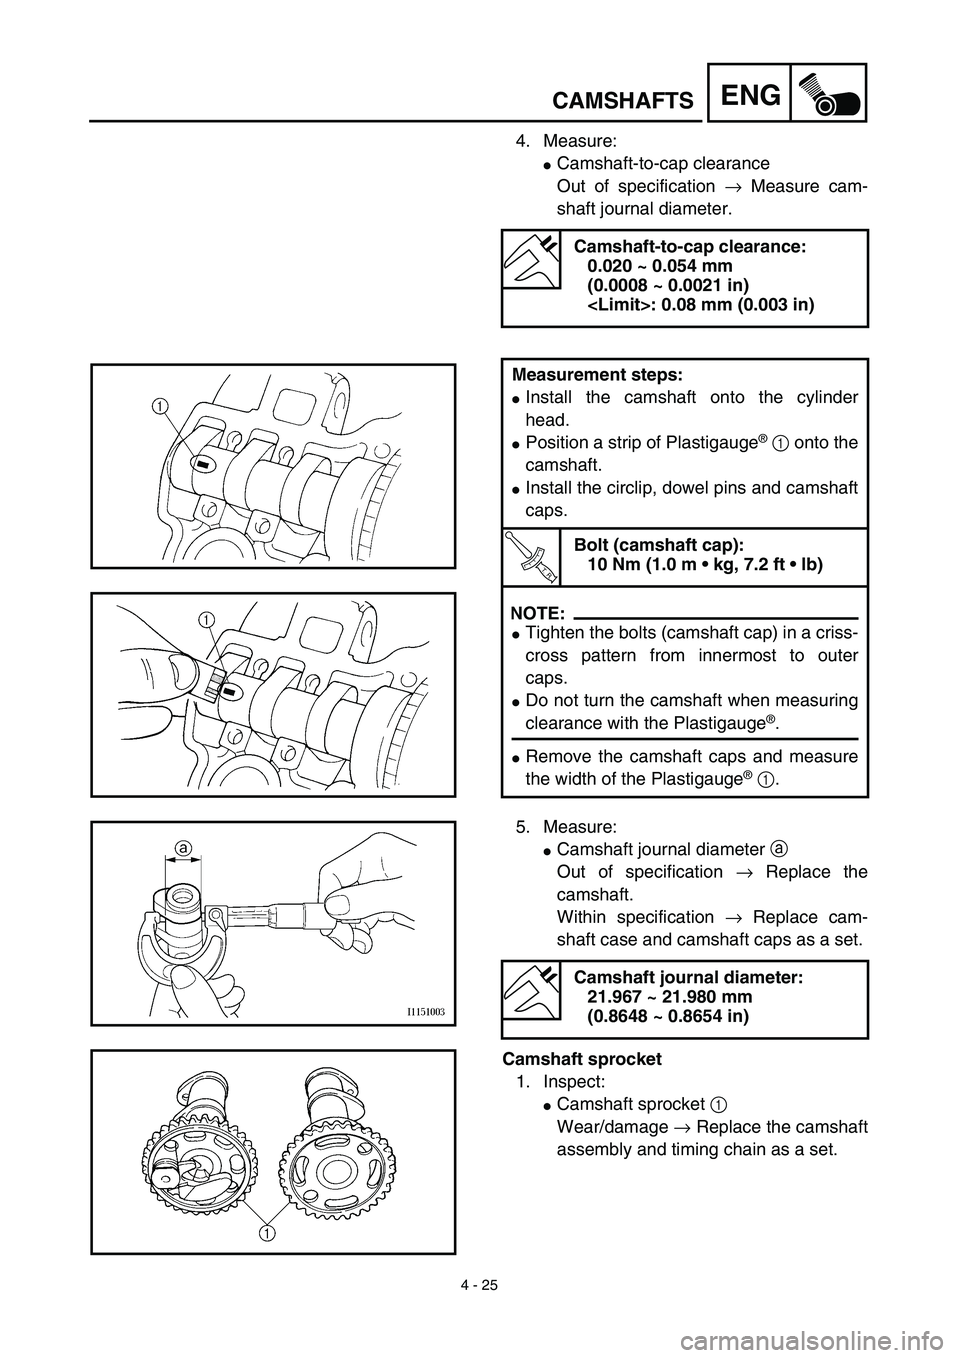 YAMAHA YZ450F 2003  Owners Manual 4 - 25
ENGCAMSHAFTS
4. Measure:
Camshaft-to-cap clearance 
Out of specification → Measure cam-
shaft journal diameter. 
Camshaft-to-cap clearance:
0.020 ~ 0.054 mm 
(0.0008 ~ 0.0021 in)
<Limit>: 0.